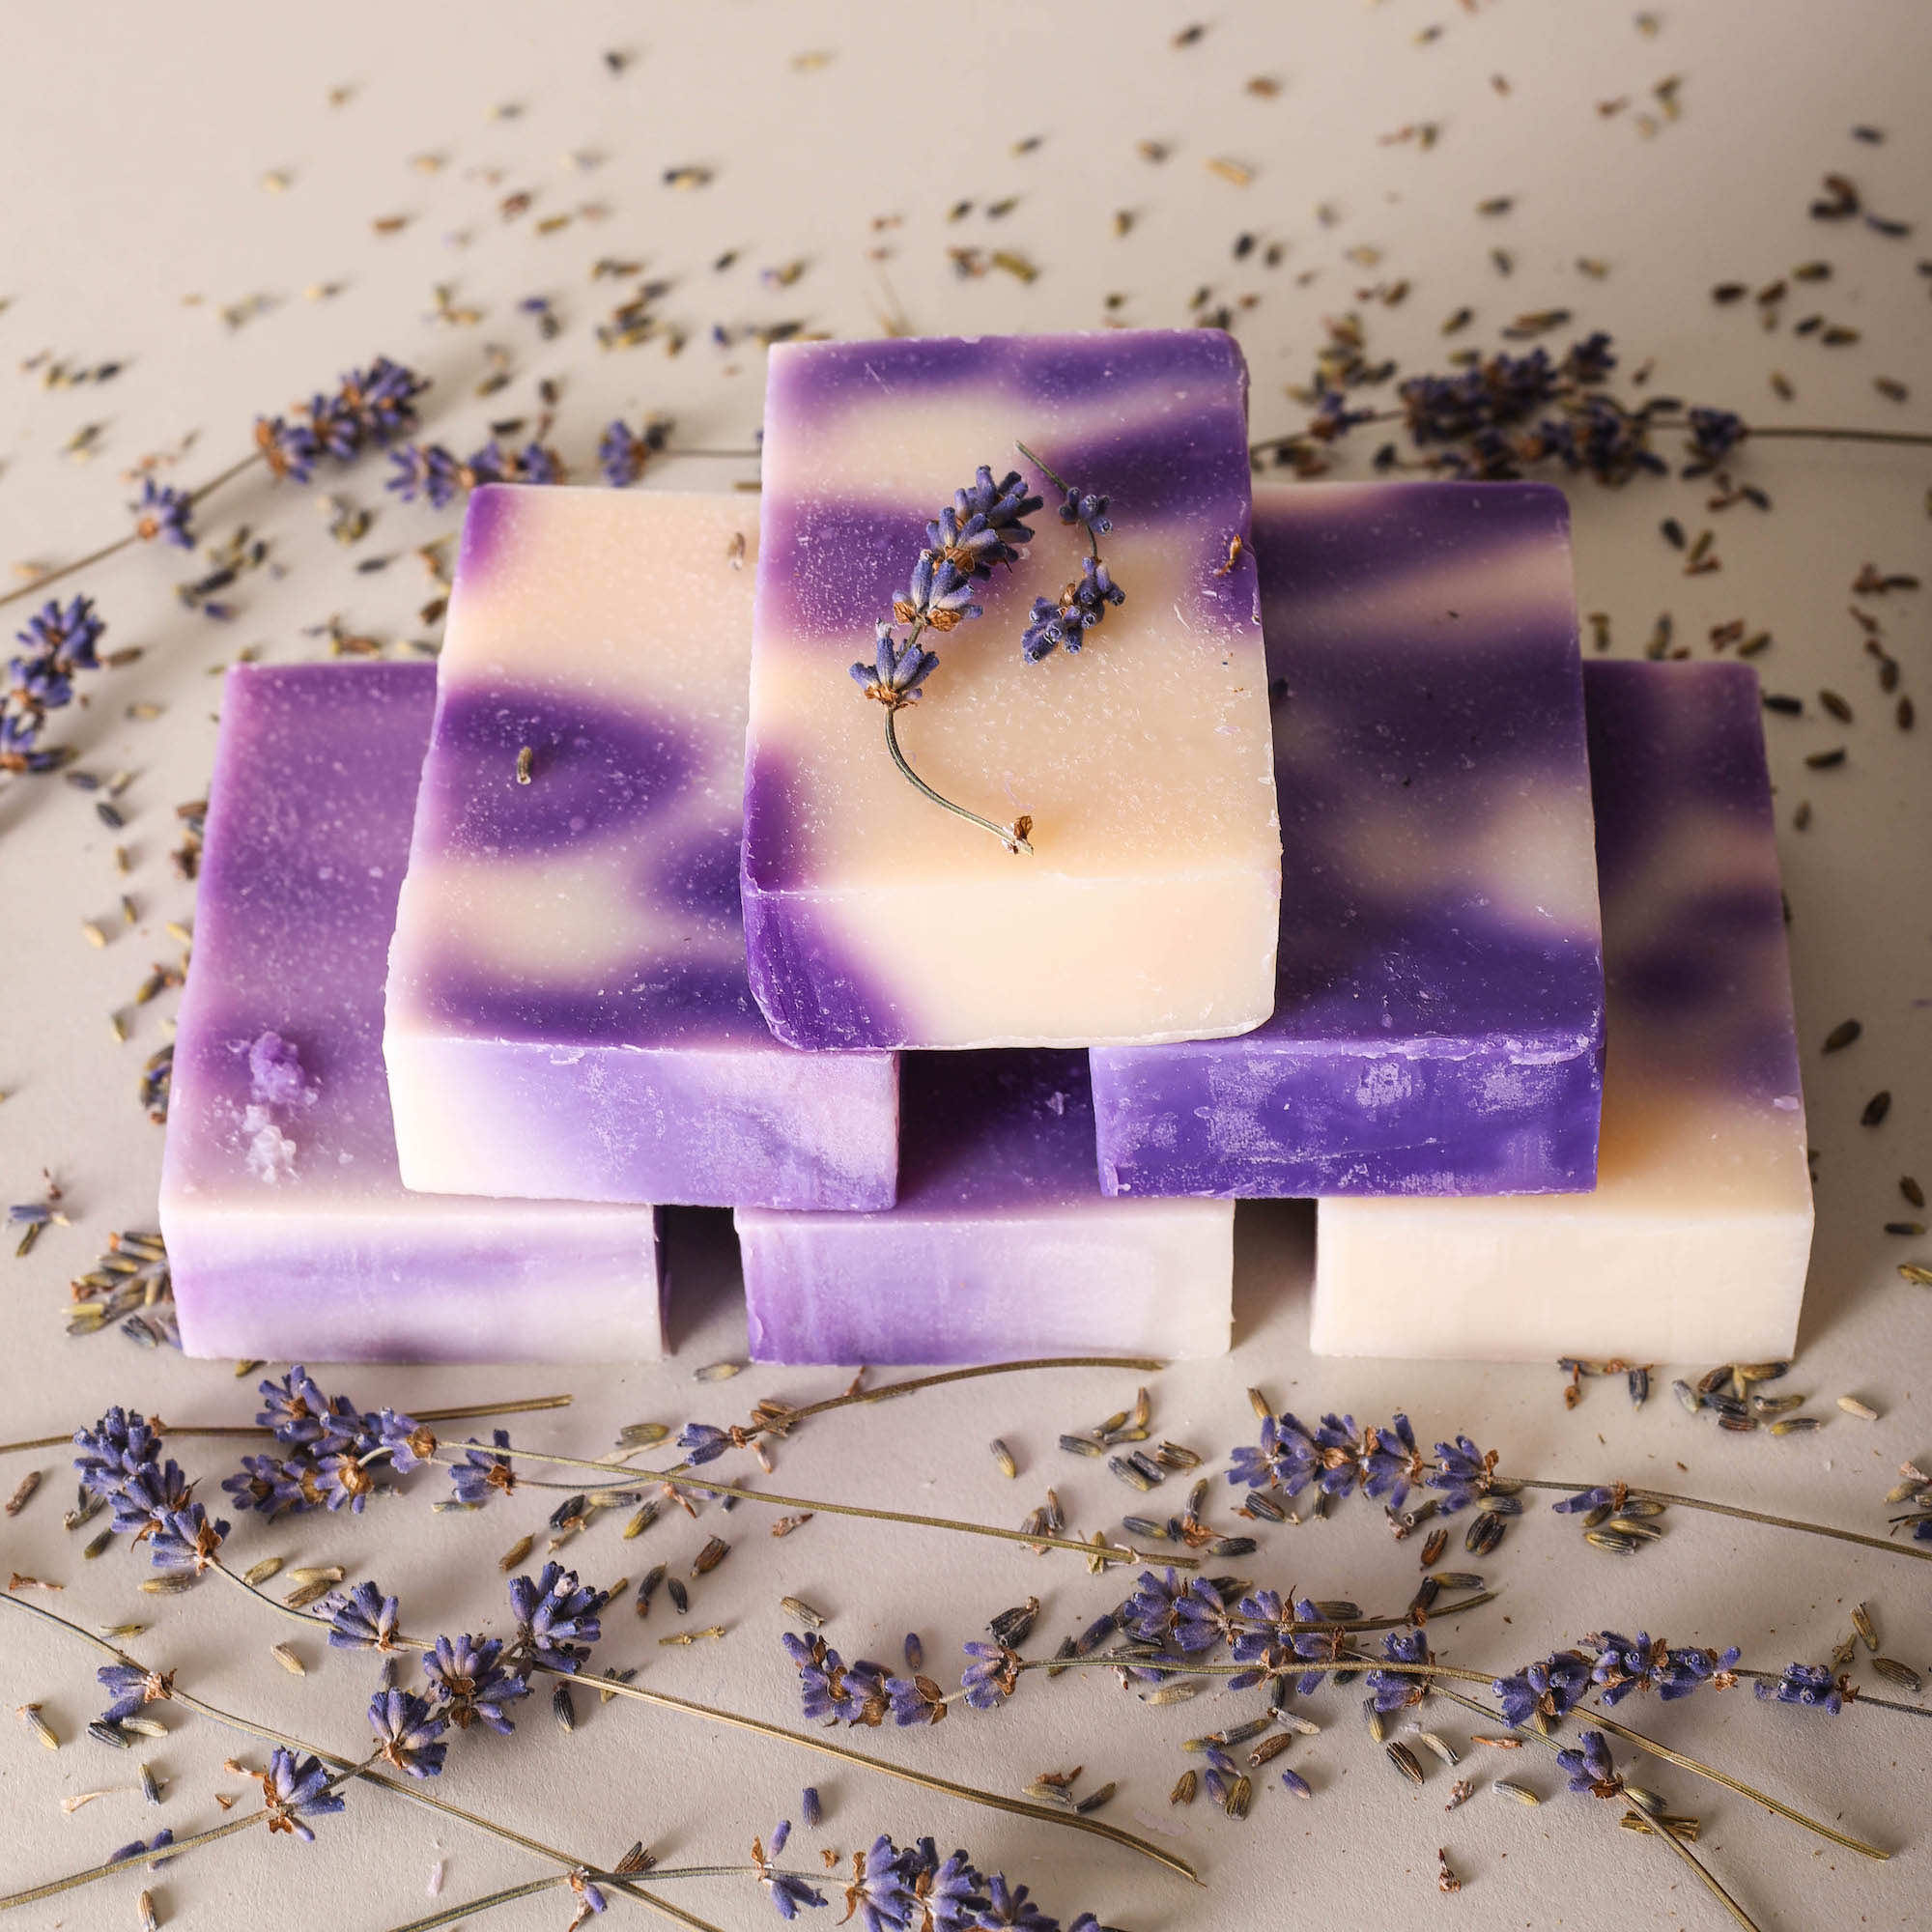 Stacked bars of purple and cream lavender soap